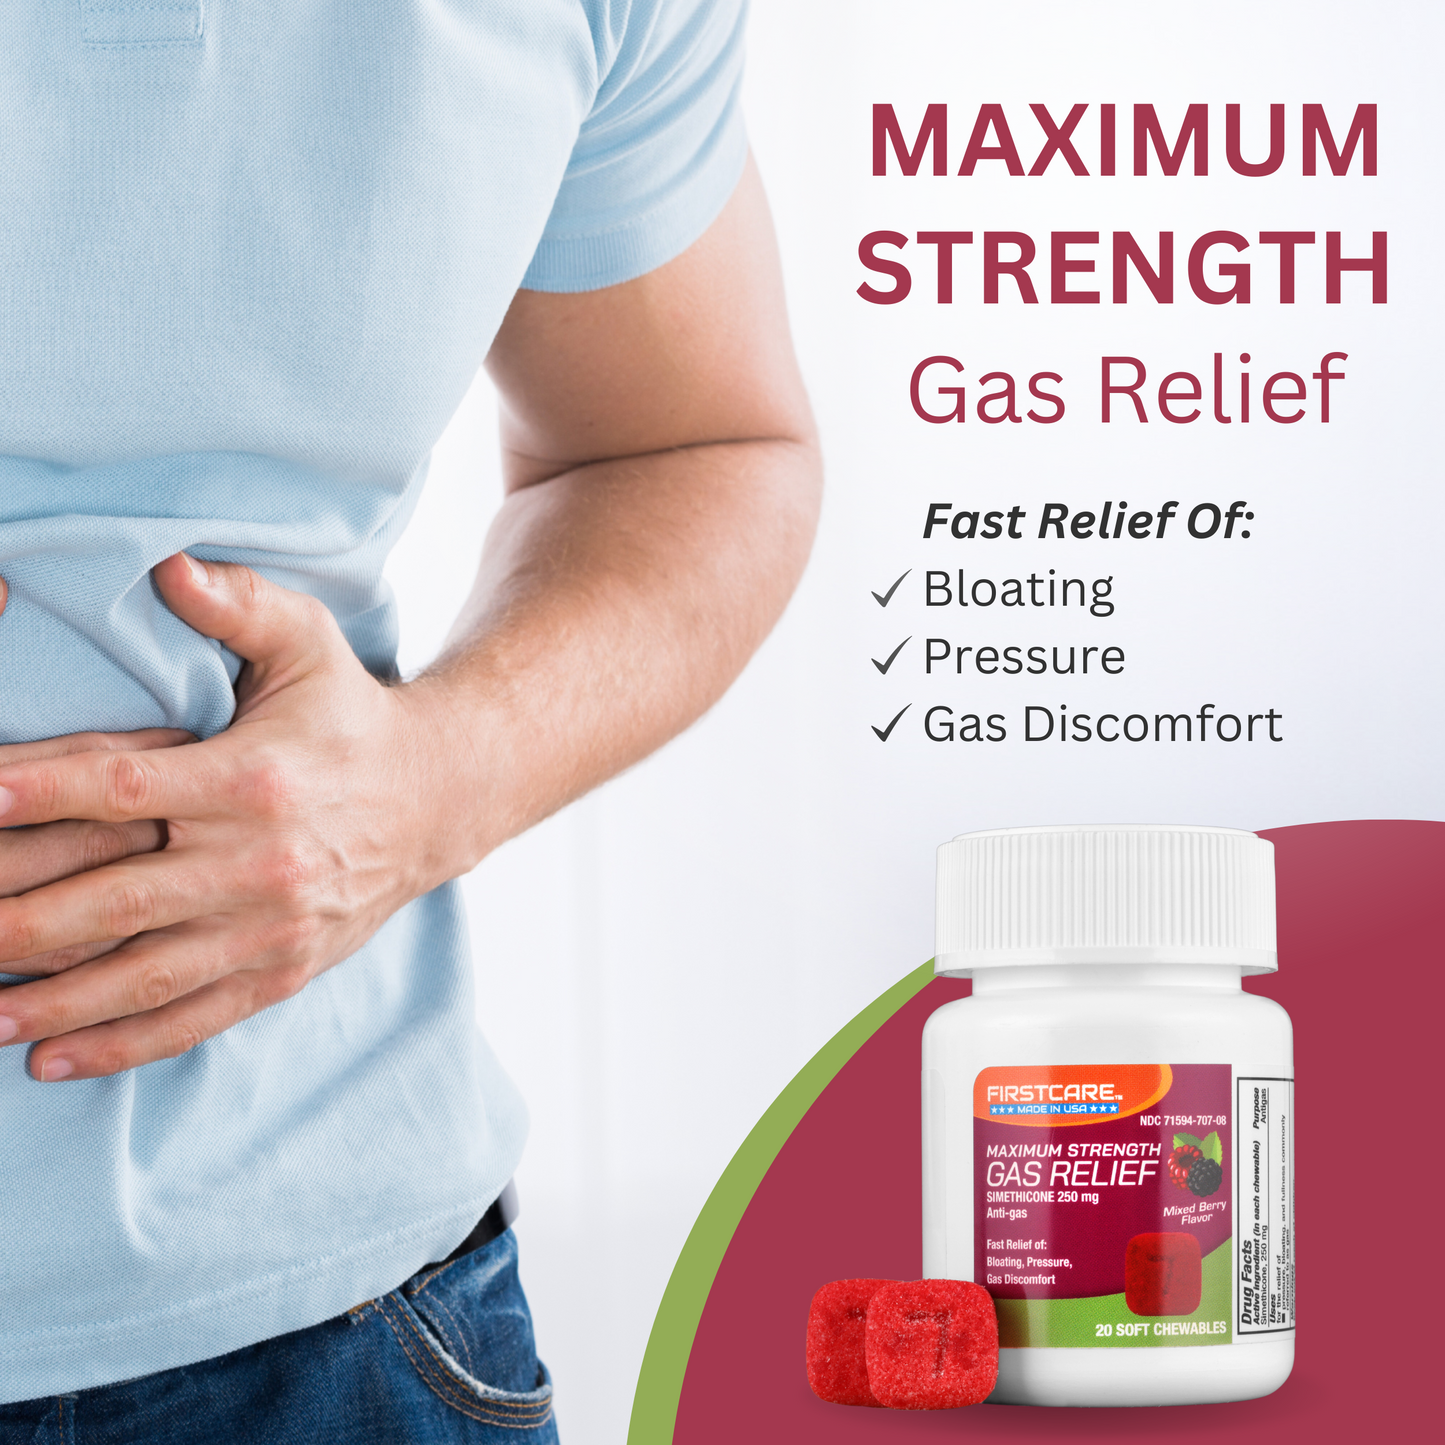 Get fast relief of bloating, pressure and gas discomfort from gas relief soft chewables